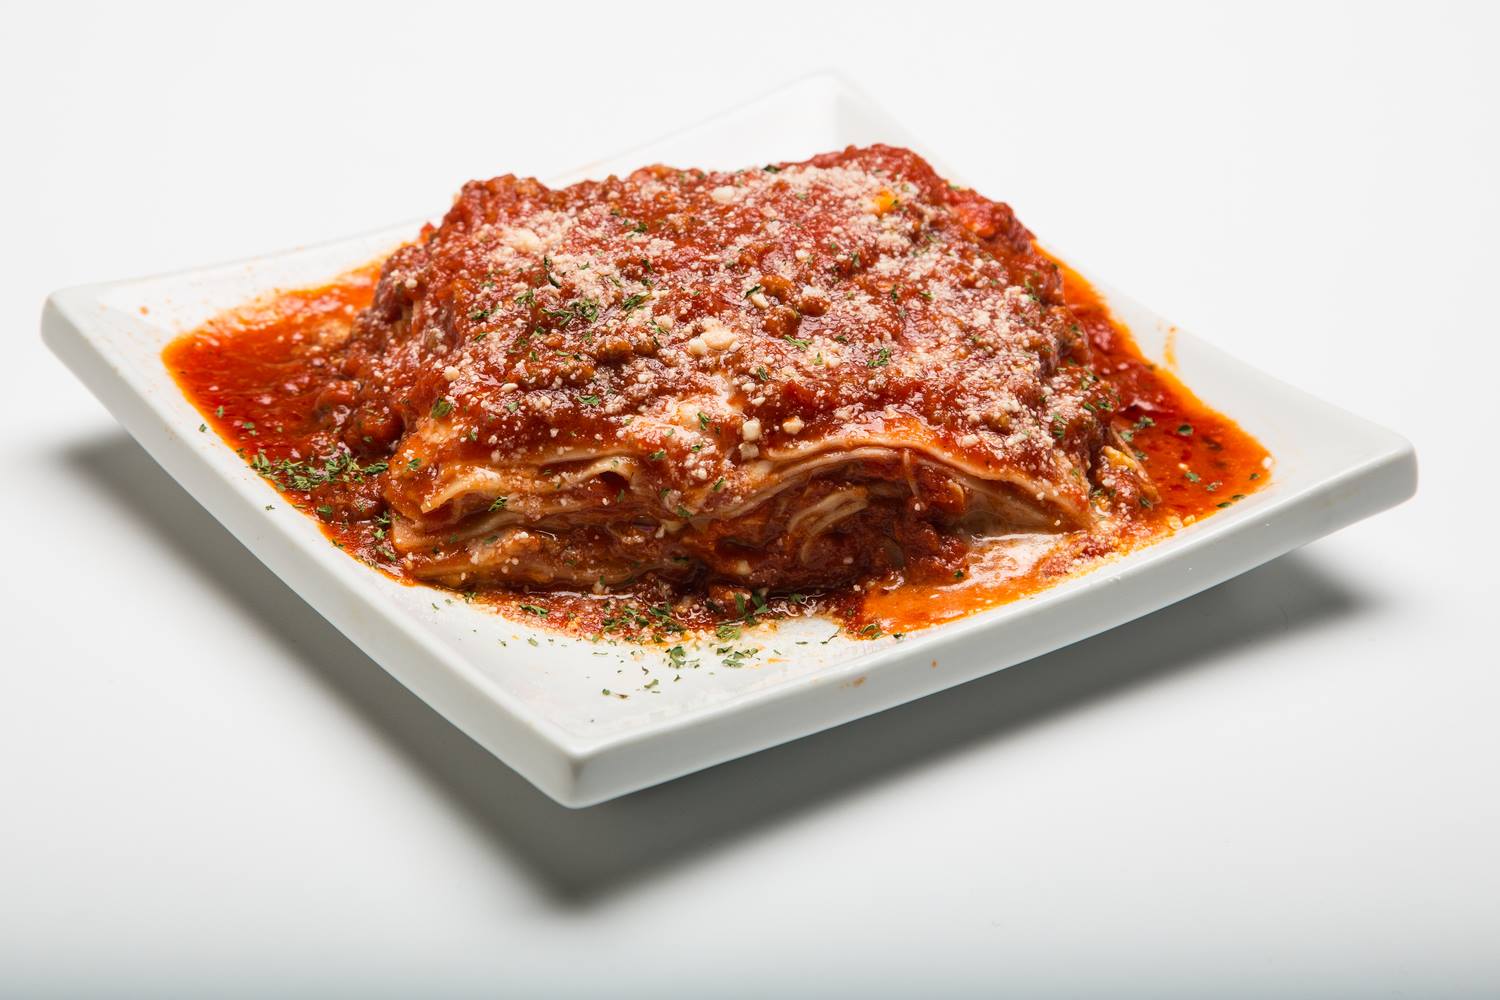 De Luca Fine Foods is known for their lasagna.